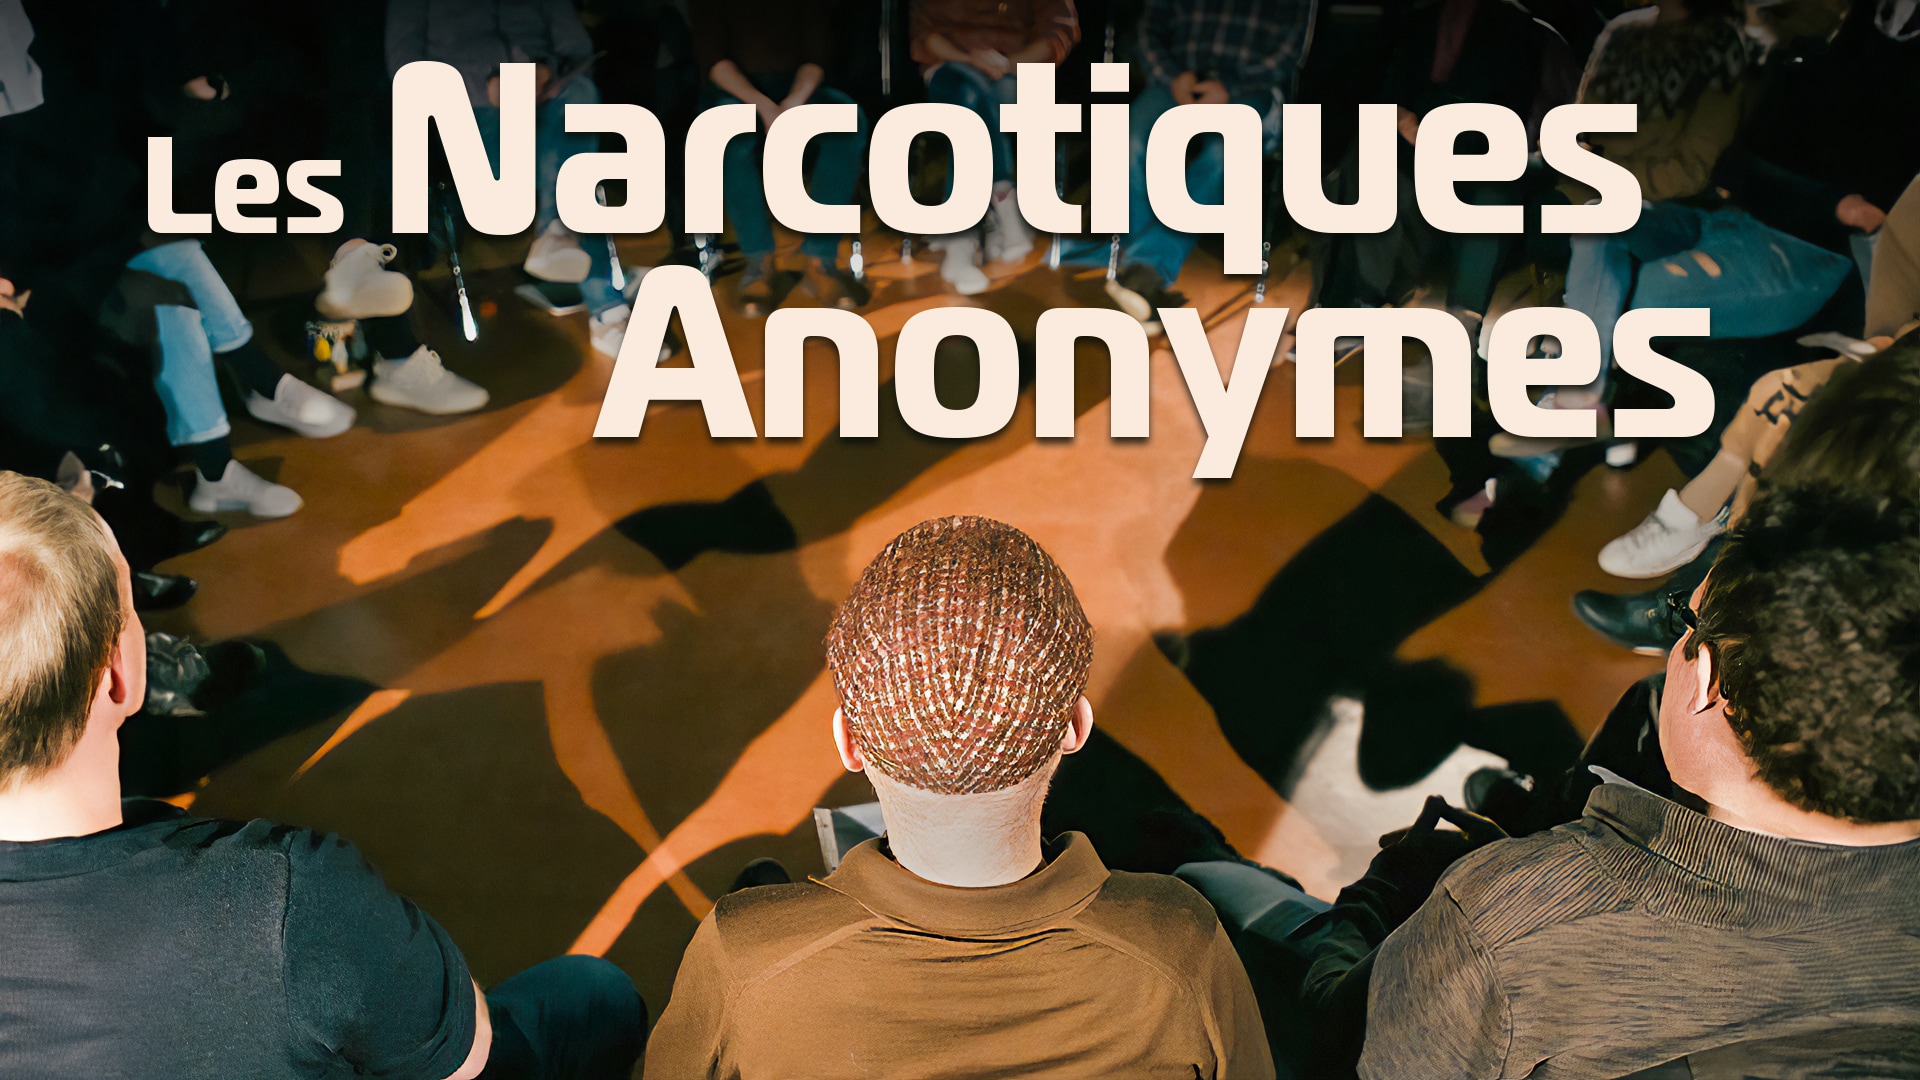 Les Narcotiques Anonymes